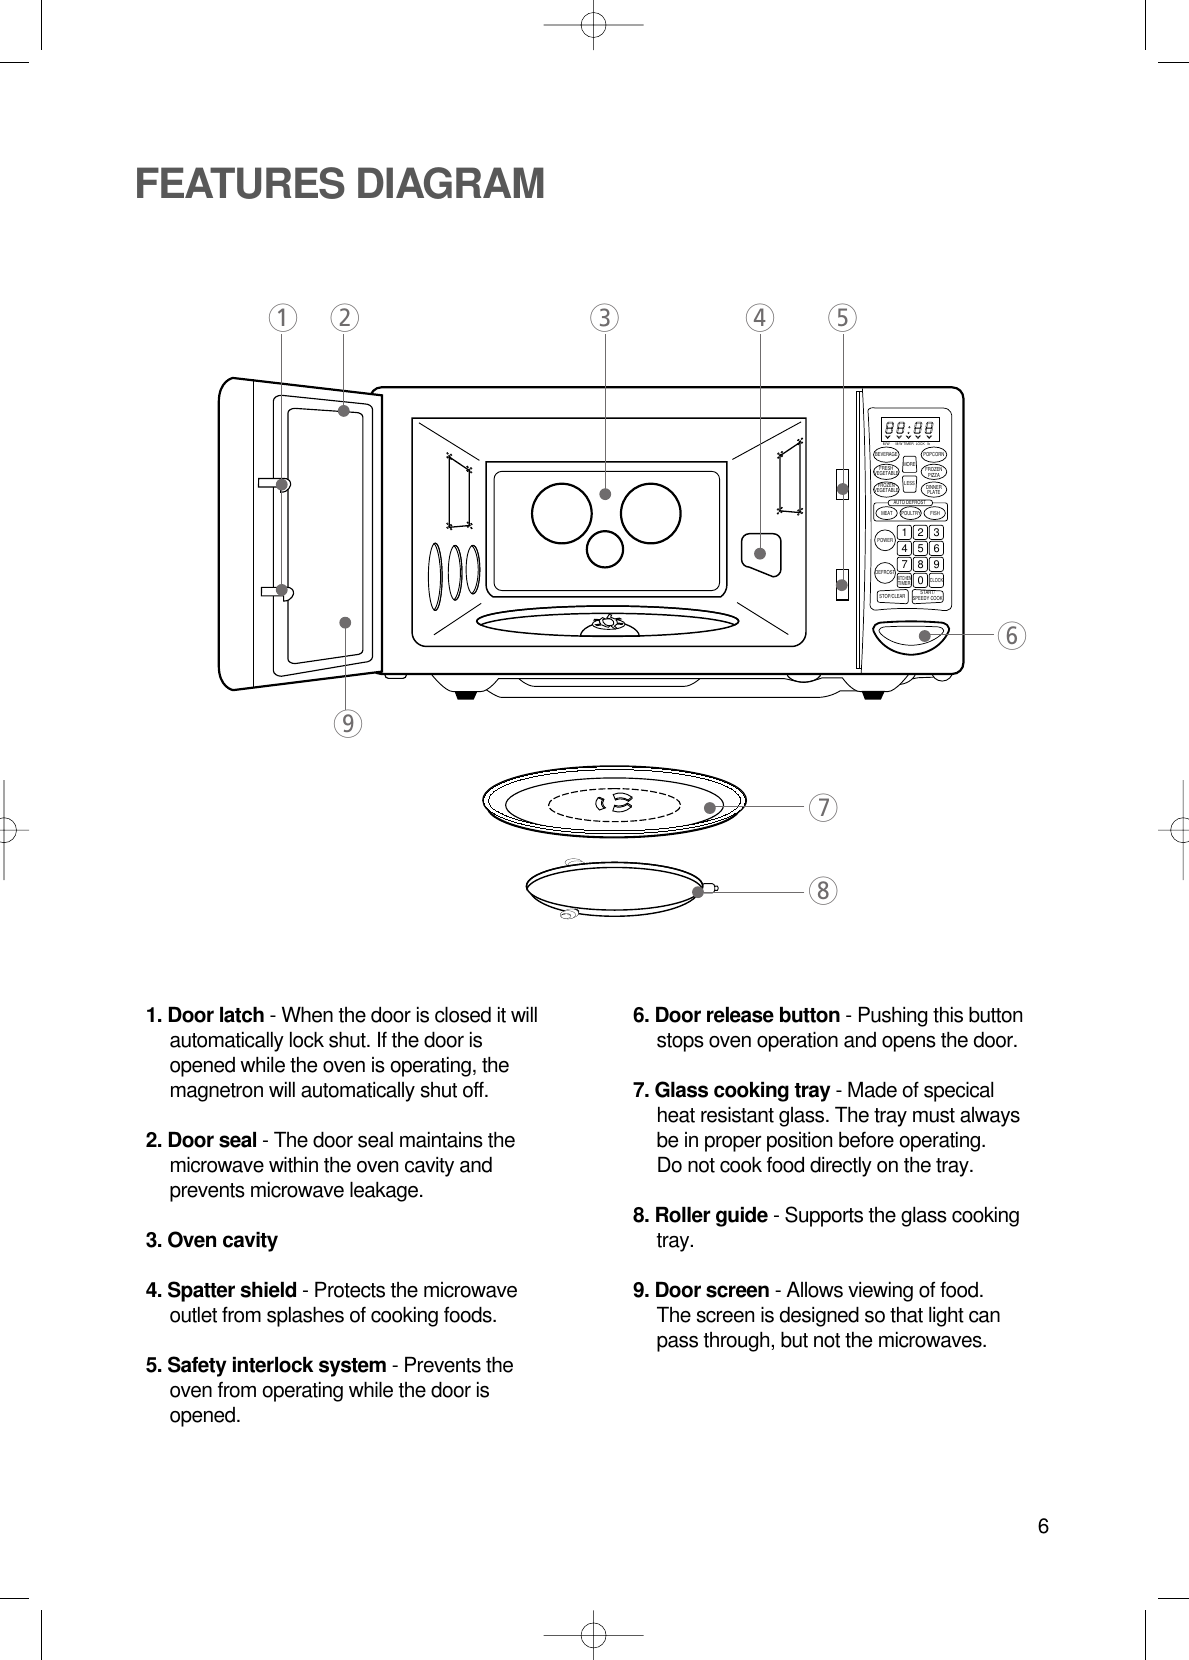 61. Door latch - When the door is closed it willautomatically lock shut. If the door isopened while the oven is operating, themagnetron will automatically shut off.2. Door seal - The door seal maintains themicrowave within the oven cavity andprevents microwave leakage.3. Oven cavity4. Spatter shield - Protects the microwaveoutlet from splashes of cooking foods.5. Safety interlock system - Prevents theoven from operating while the door isopened.6. Door release button - Pushing this buttonstops oven operation and opens the door.7. Glass cooking tray - Made of specicalheat resistant glass. The tray must alwaysbe in proper position before operating. Do not cook food directly on the tray.8. Roller guide - Supports the glass cookingtray.9. Door screen - Allows viewing of food. The screen is designed so that light canpass through, but not the microwaves.FEATURES DIAGRAMM/W M/W LOCK lbTIMERBEVERAGE POPCORNFRESHVEGETABLE FROZENPIZZAFROZENVEGETABLE DINNERPLATEMORELESSAUTO DEFROSTMEATPOWERPOULTRY FISHDEFROSTSTOP/CLEARCLOCKKITCHENTIMER1 2 34 5 67 8 90START/SPEEDY COOK12          3     4  59786